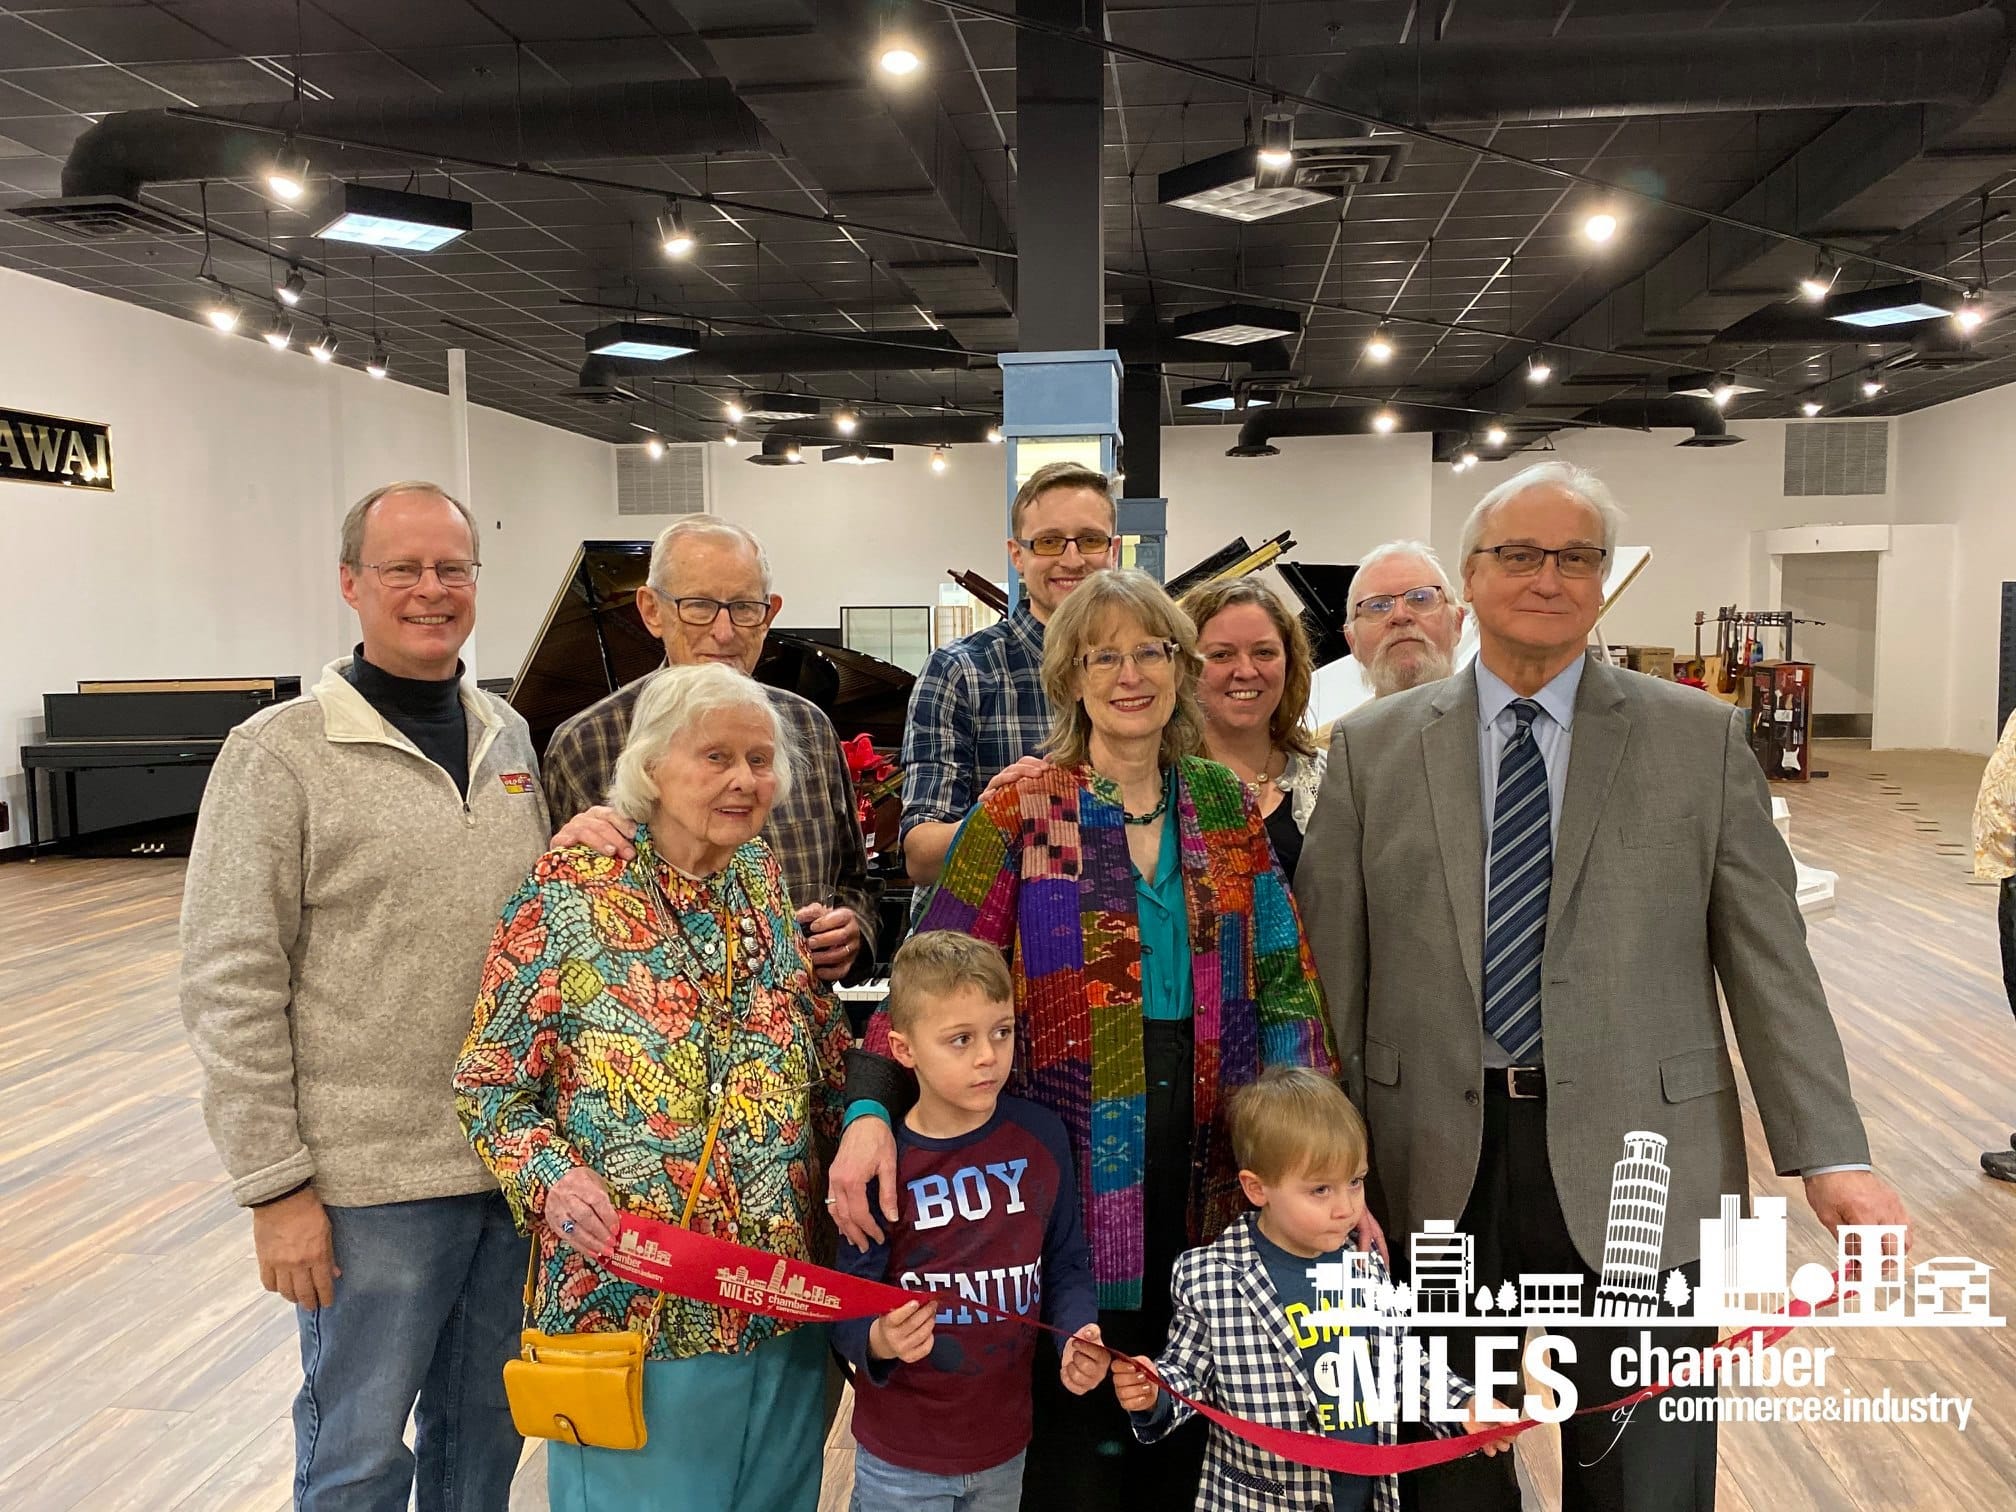 Alviani-Garrison family portrait at the opening of the Golf Mill Mall location in 2019